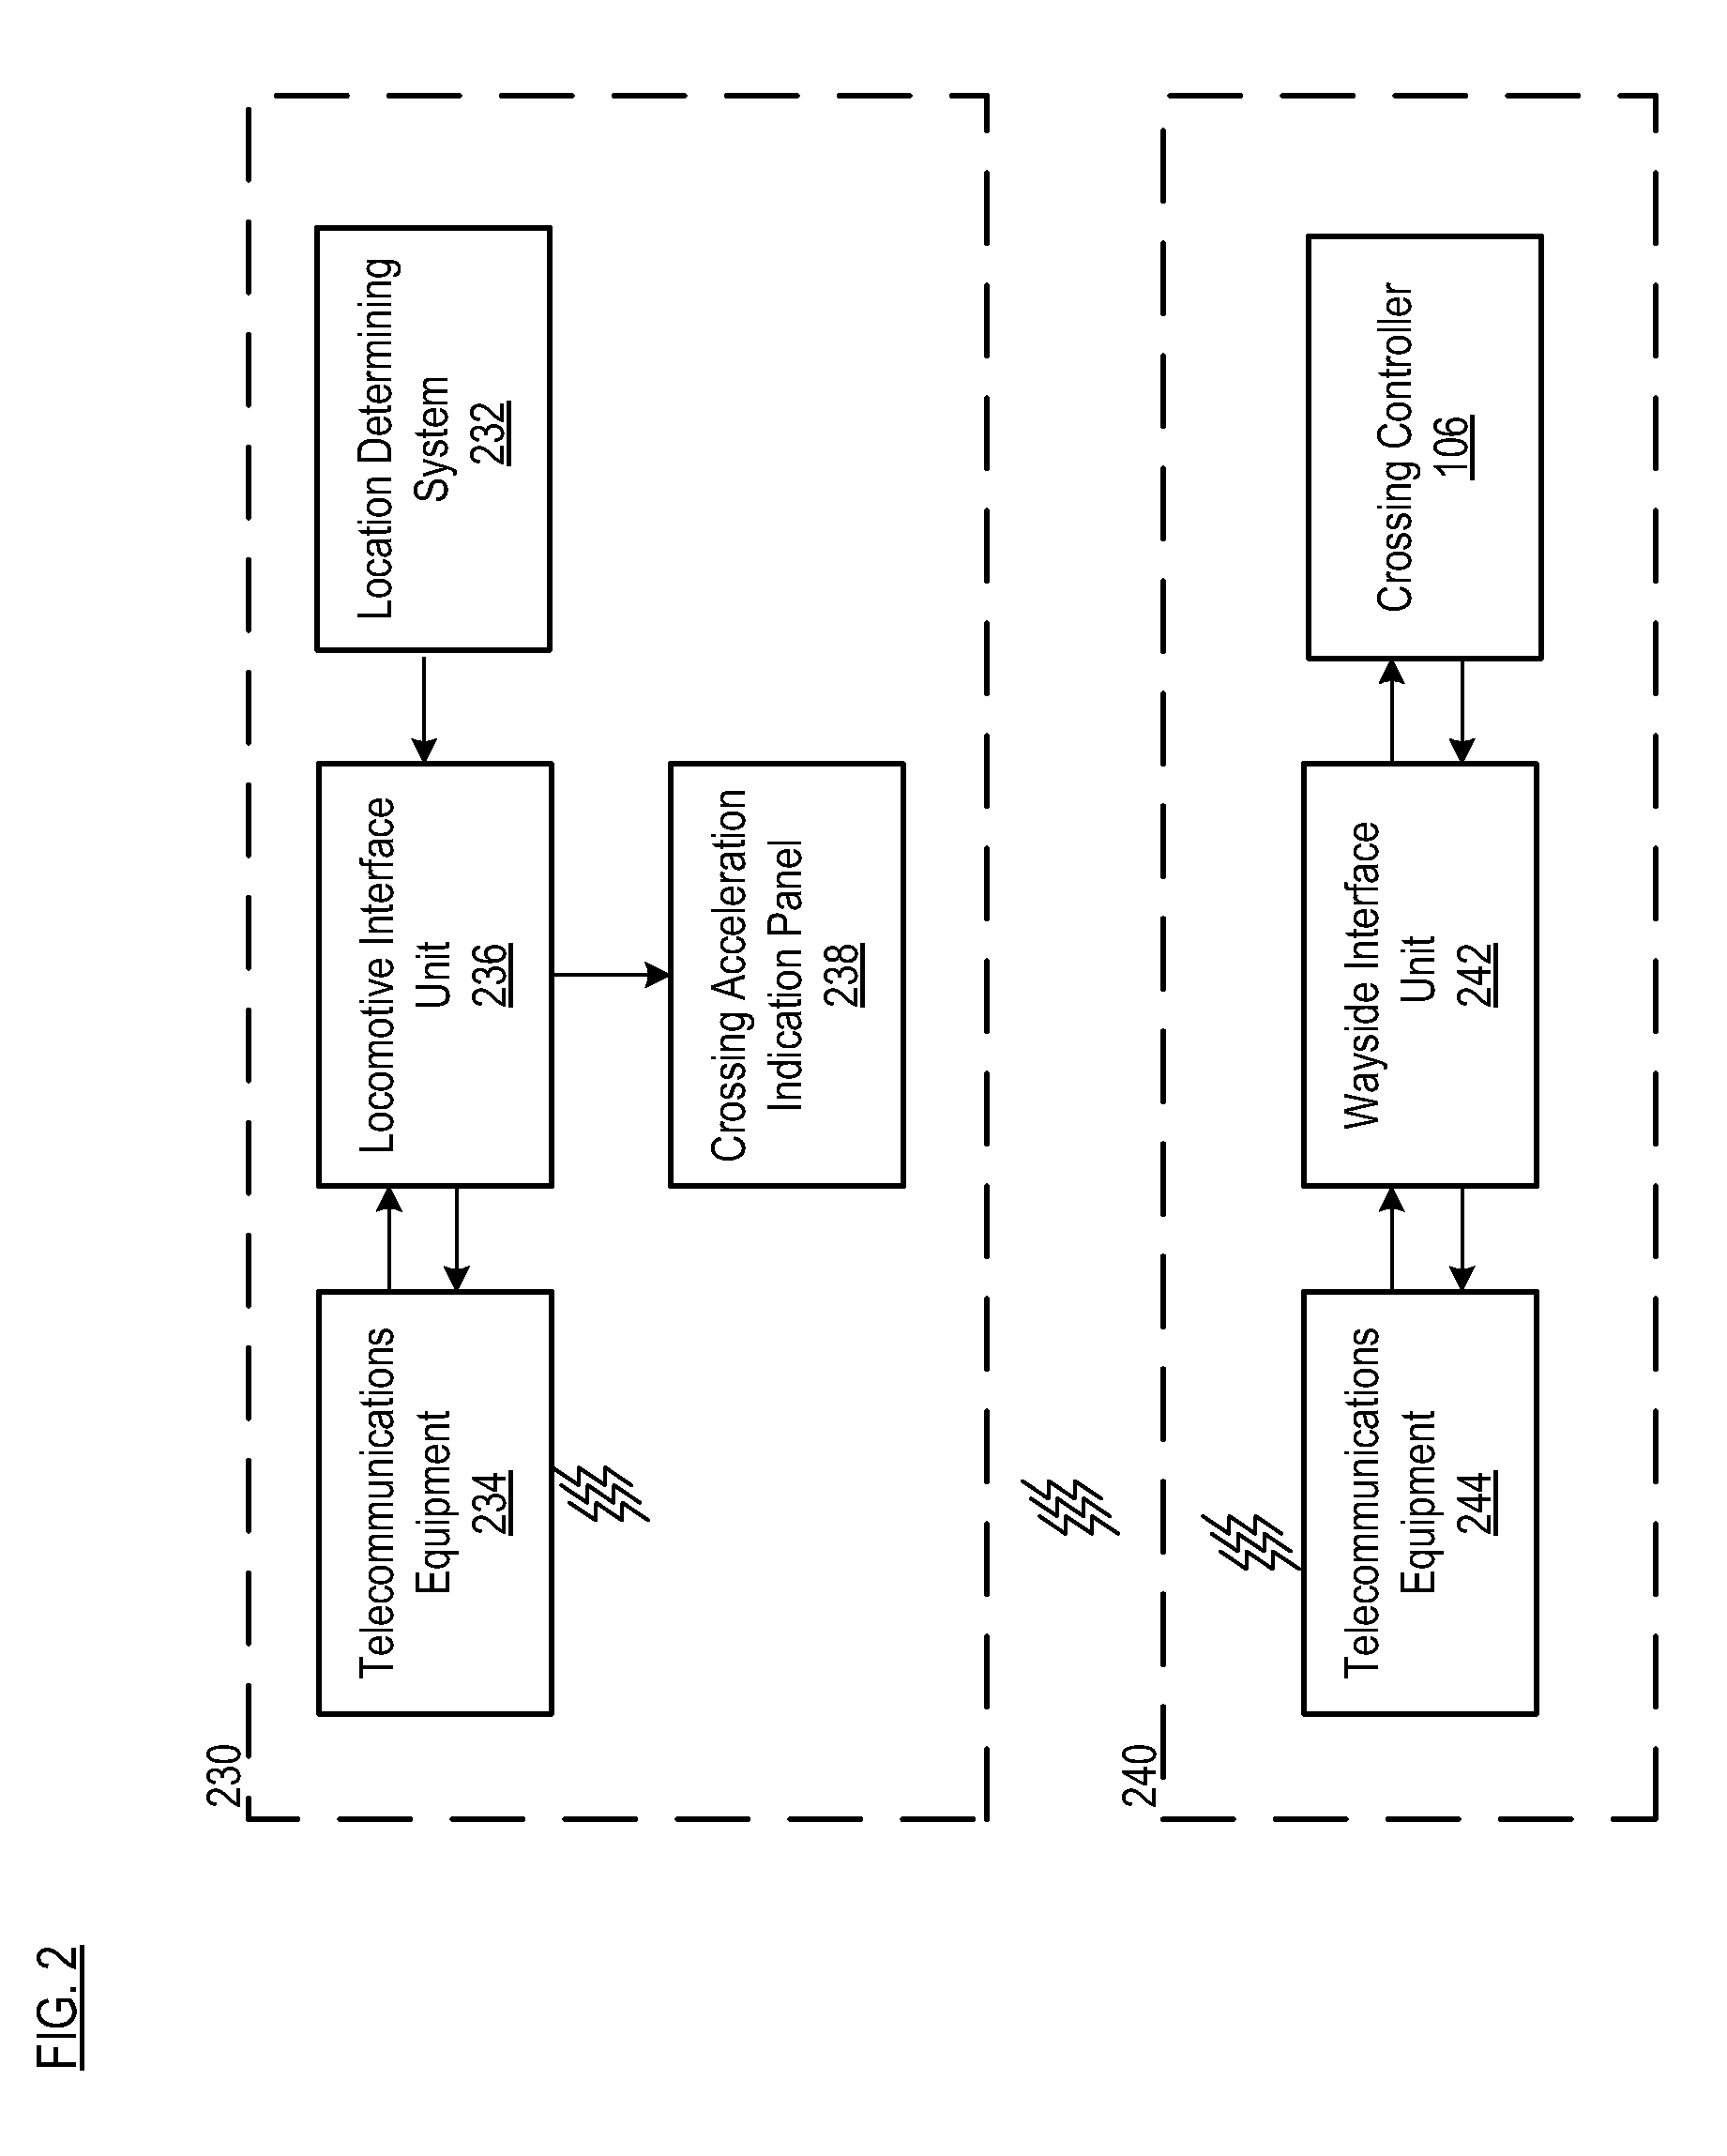 System and method for train operation approaching grade crossings